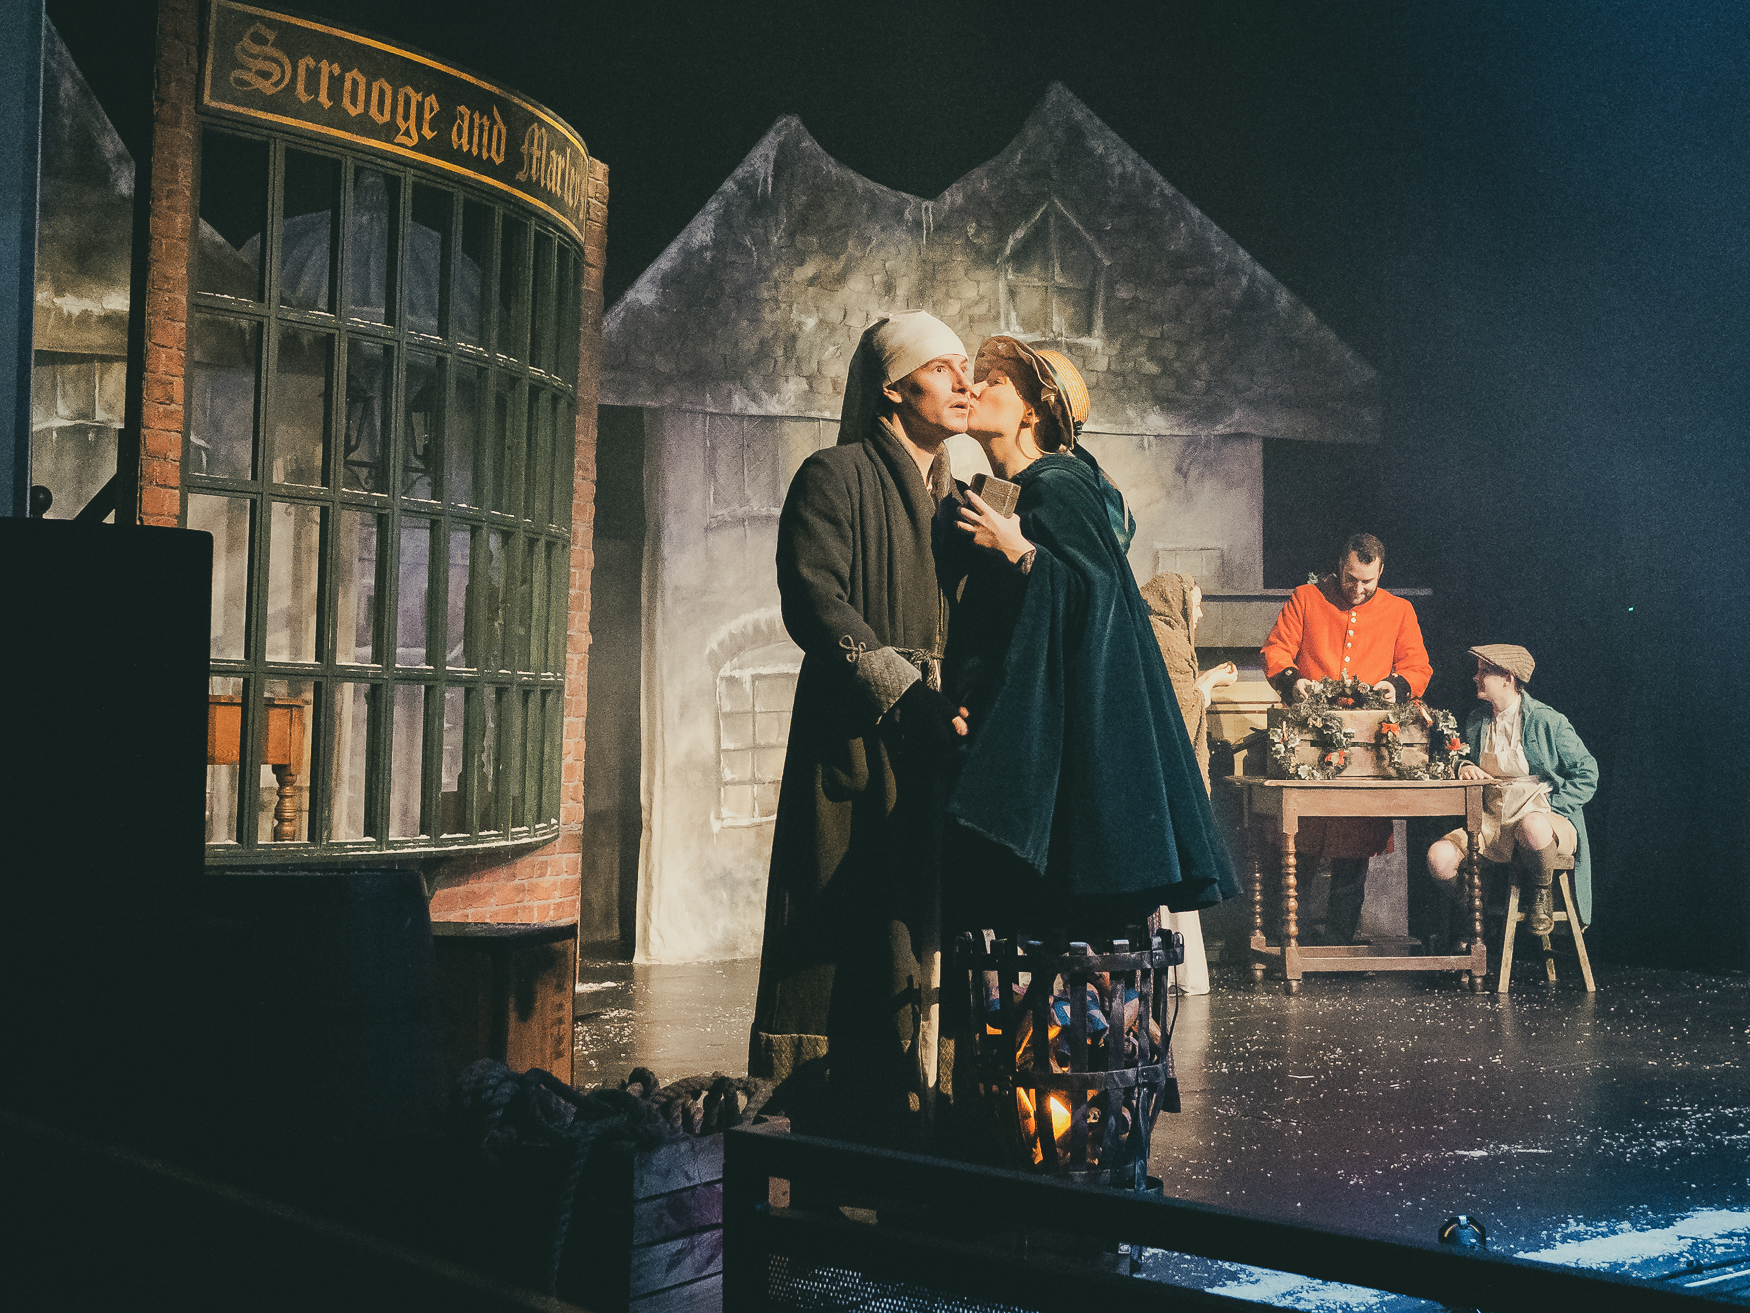 a man and woman kissing on a stage